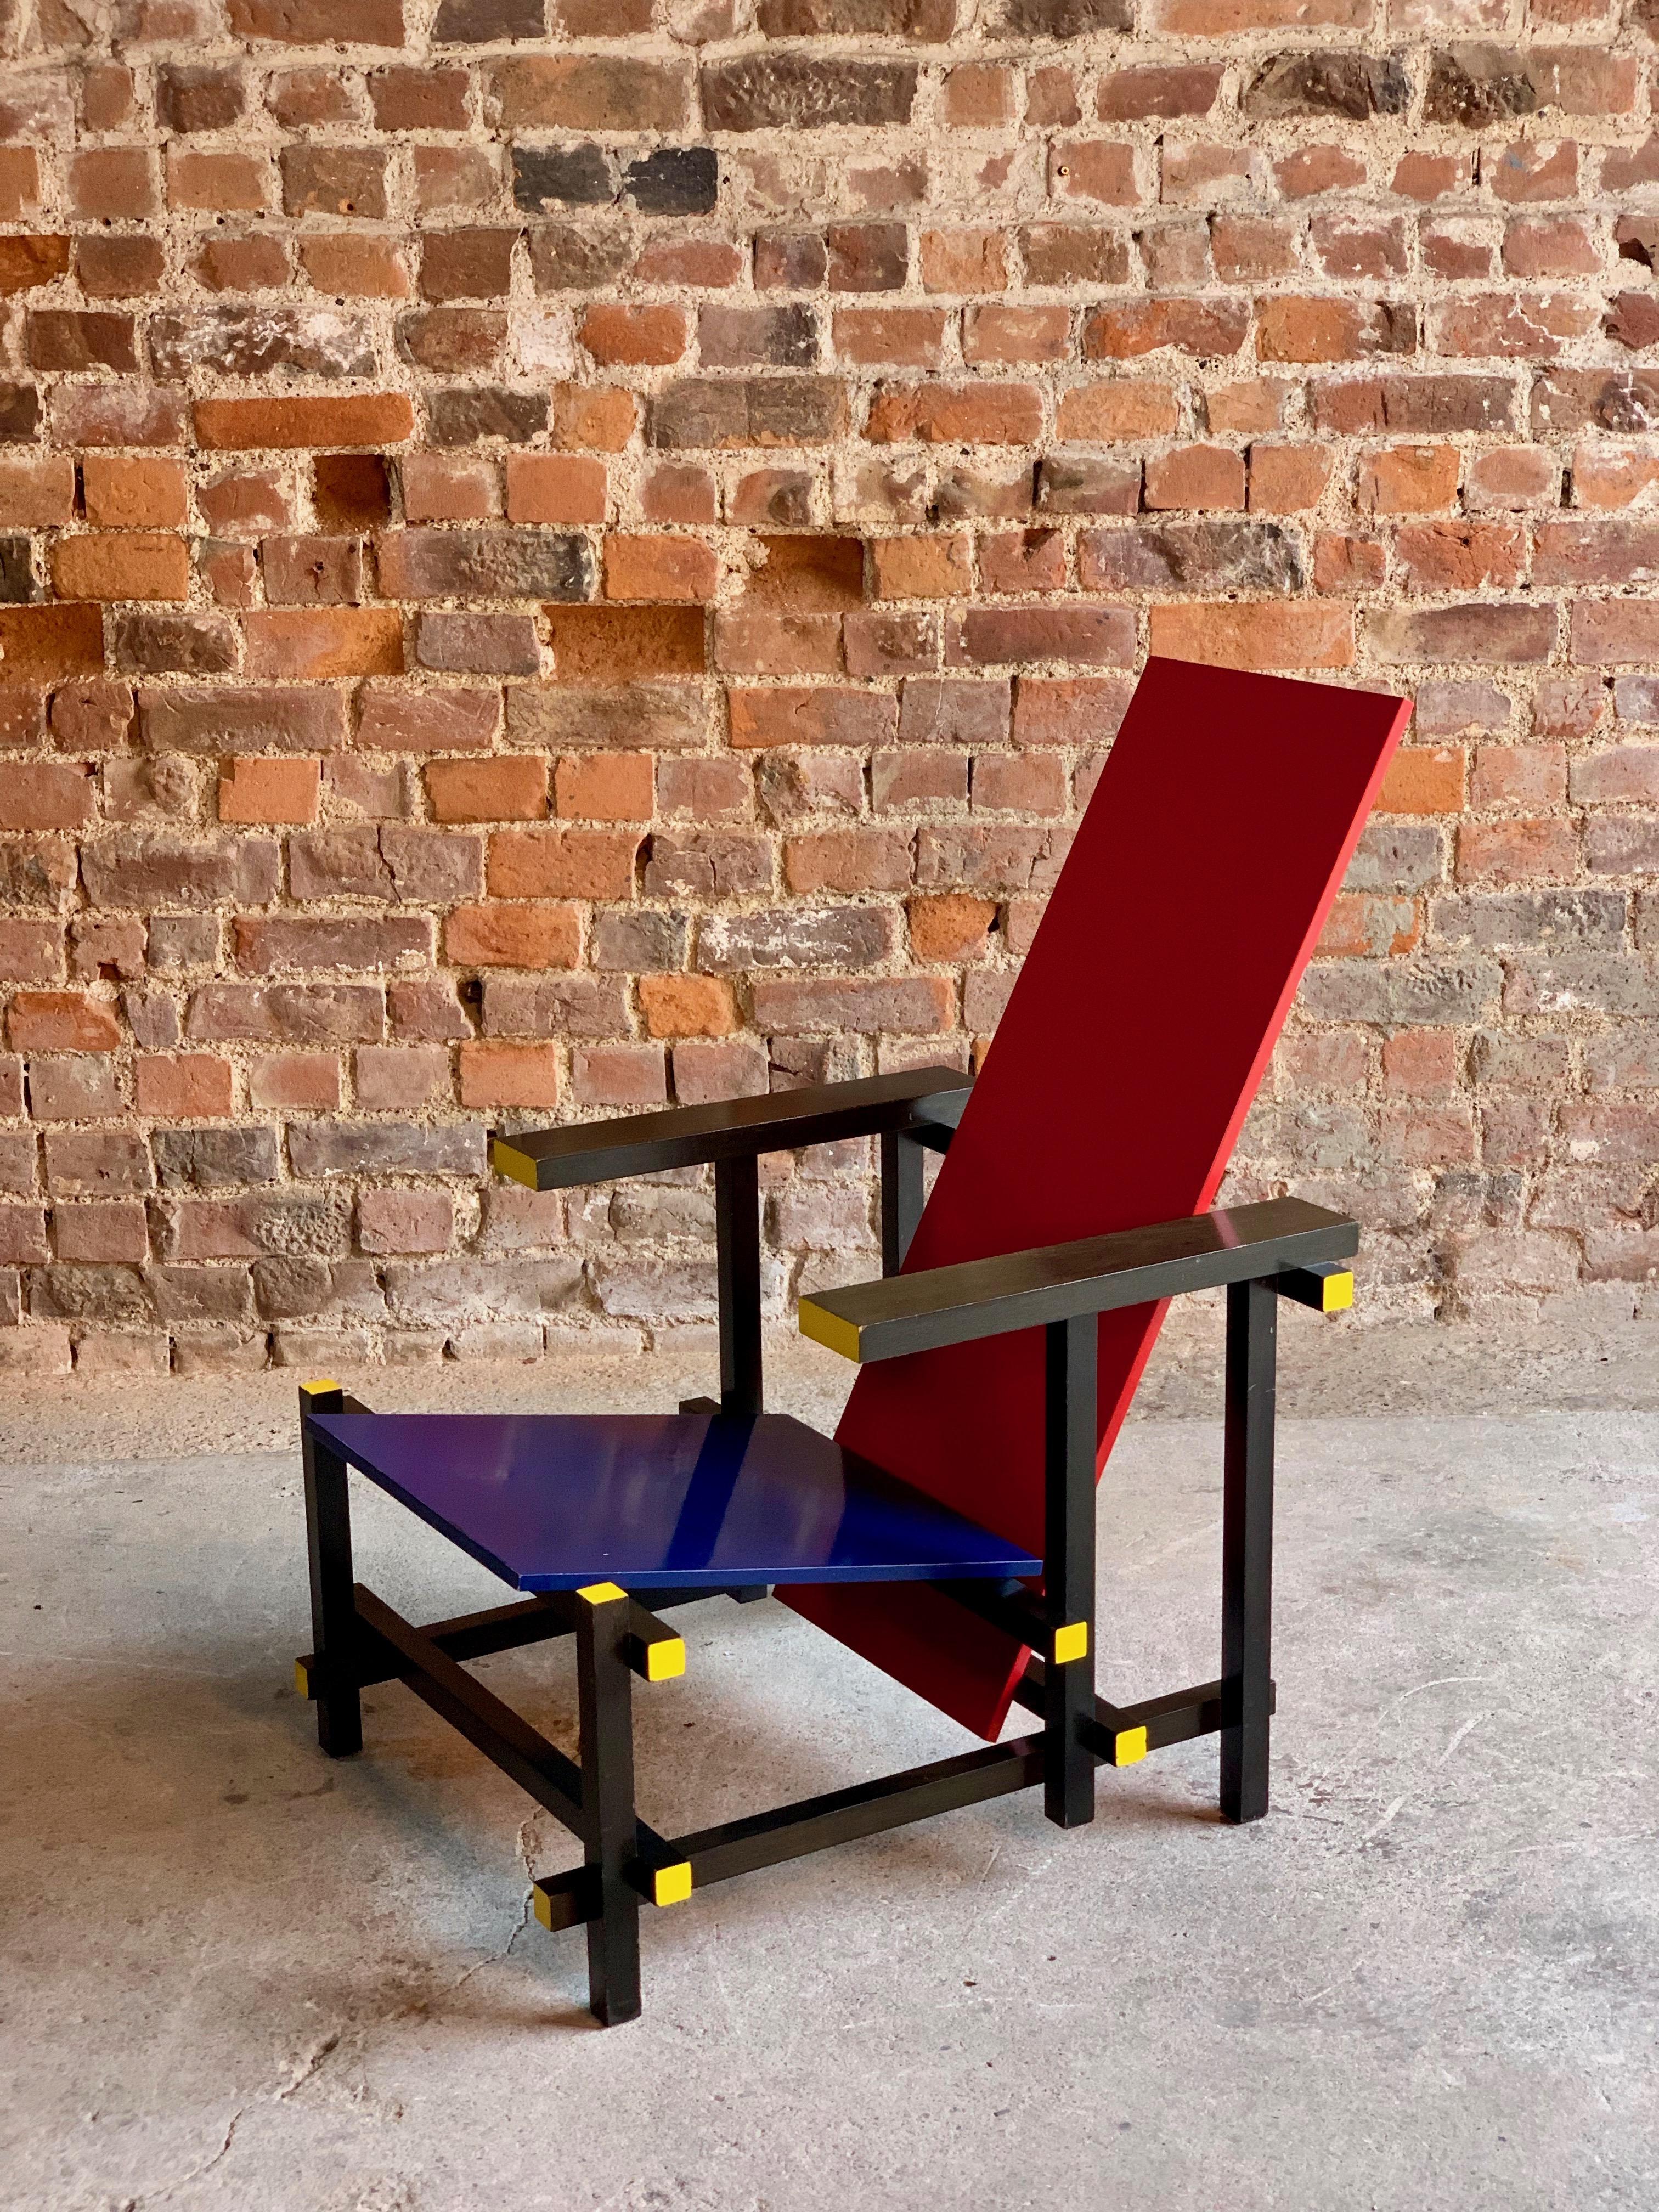 Late 20th Century Cassina Red and Blue Chair by Gerrit T Rietveld Numbered 8488, Italy, circa 1970